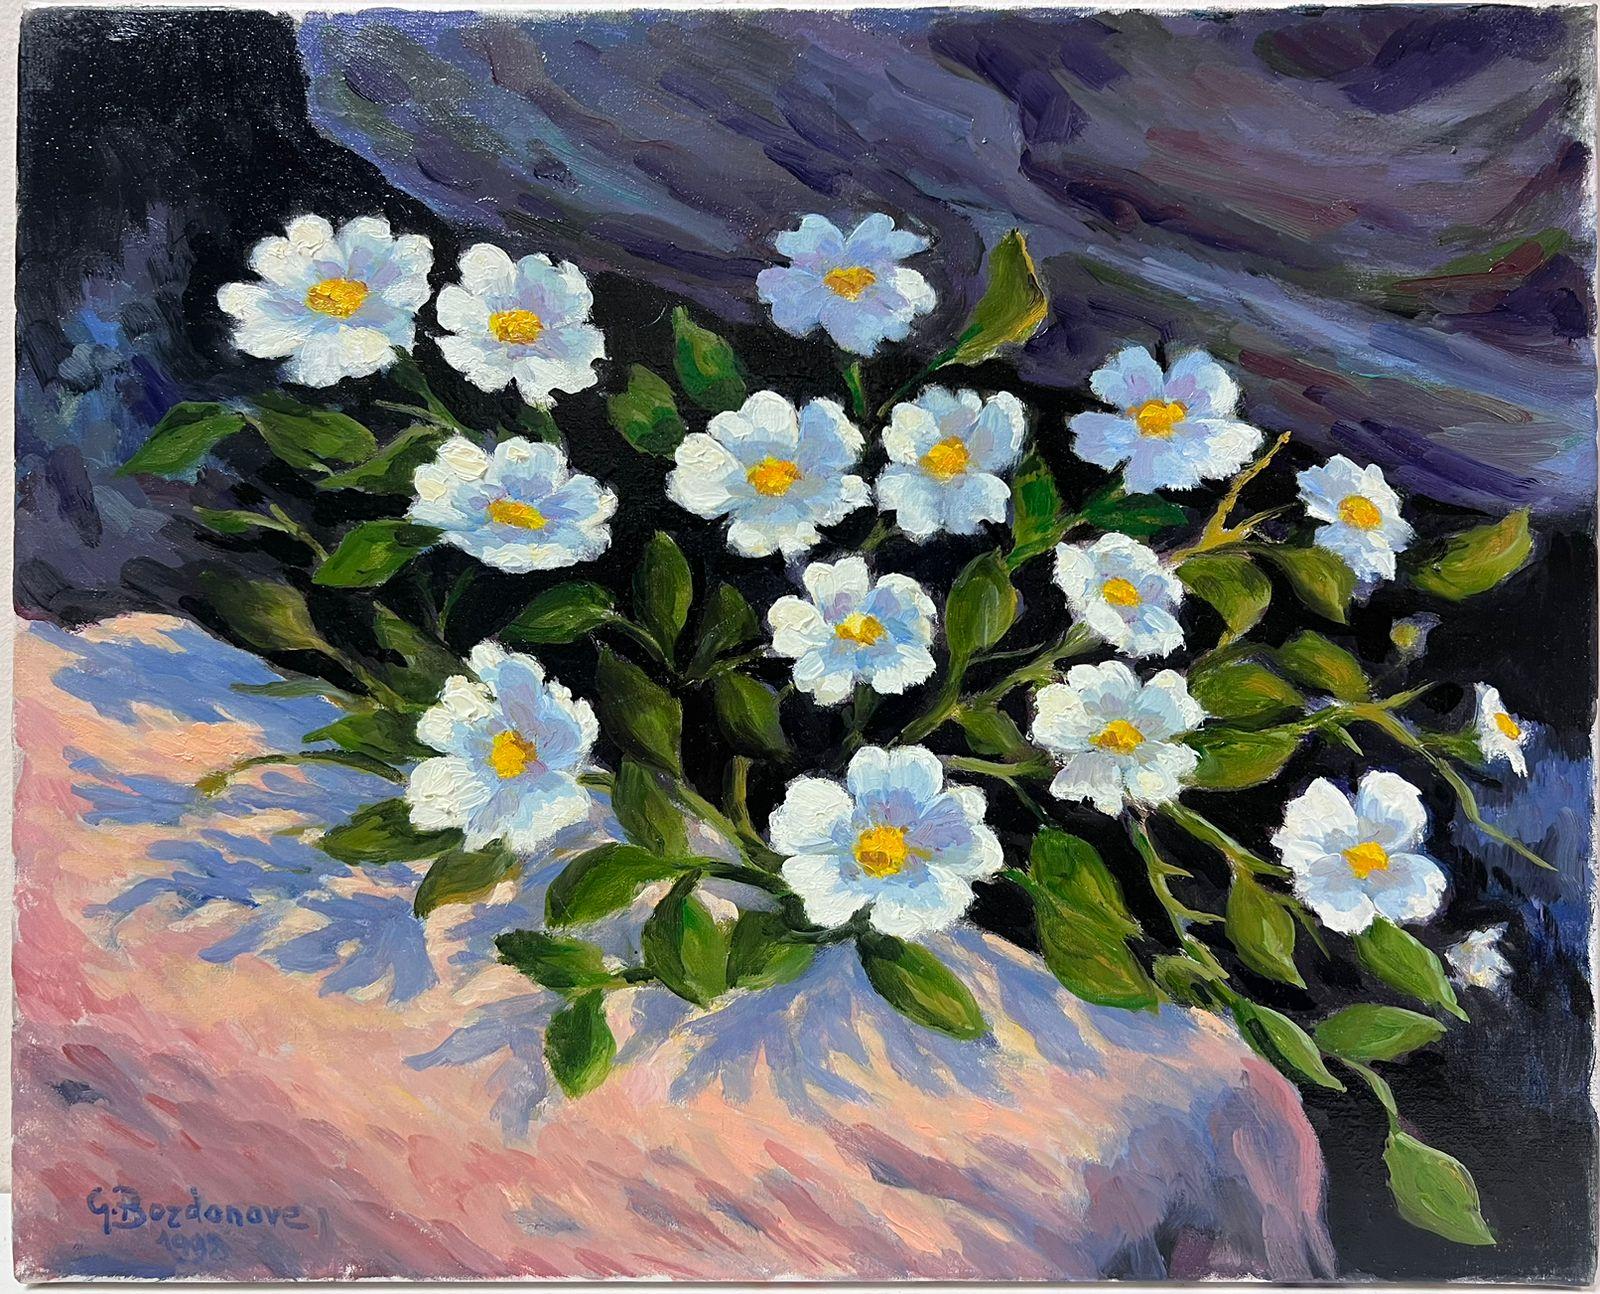 Contemporary French Impressionist Oil White Flowers on Rocky Ledge - Painting by Georges Bordonove